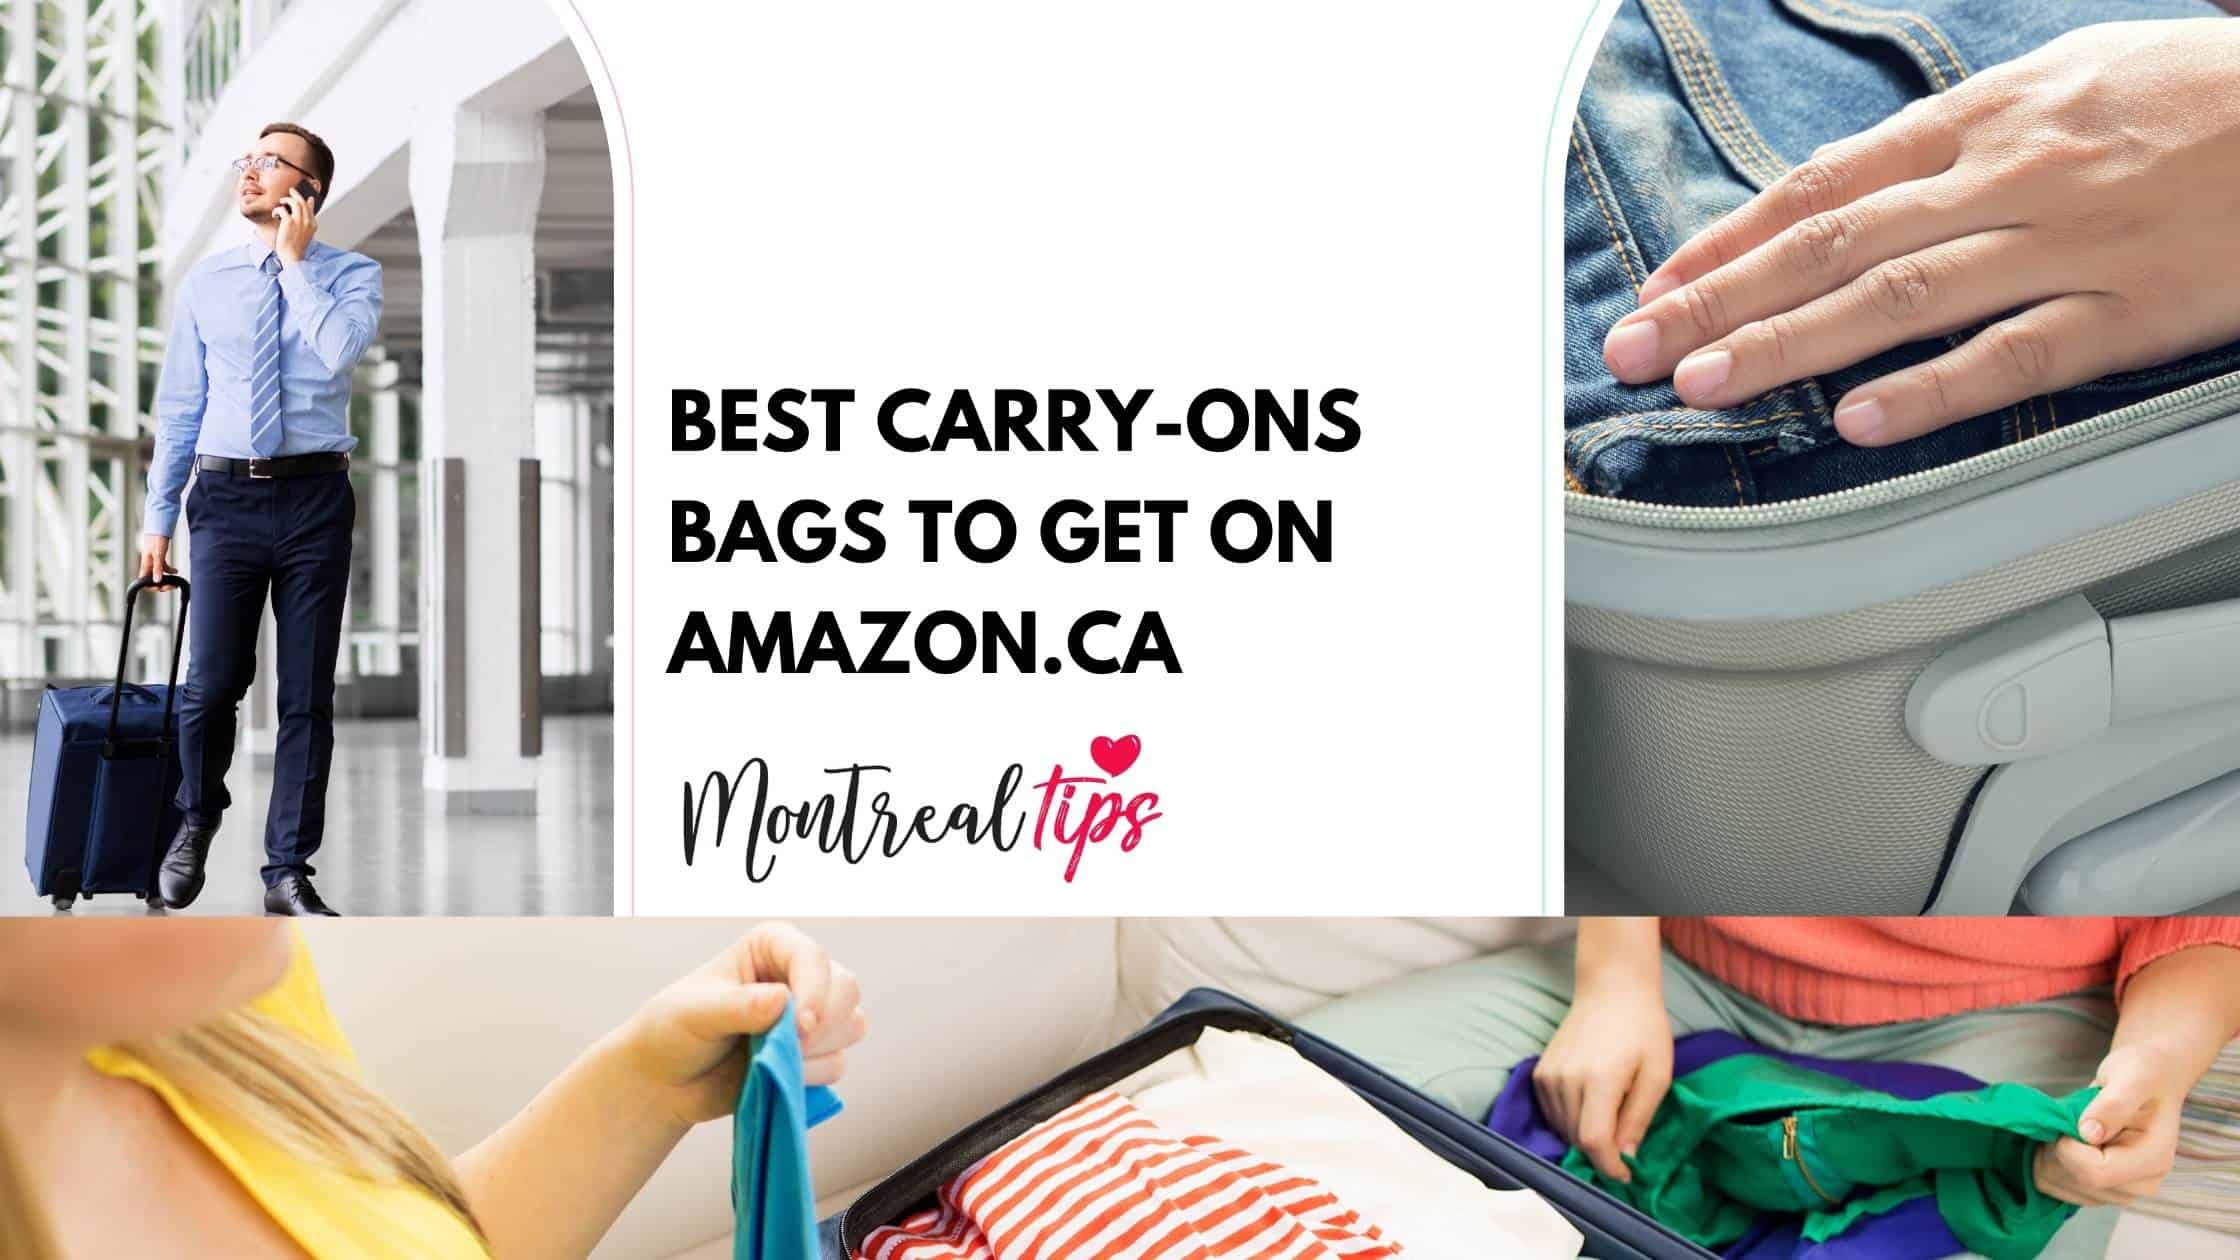 Best CarryOns bags to get on amazon.ca